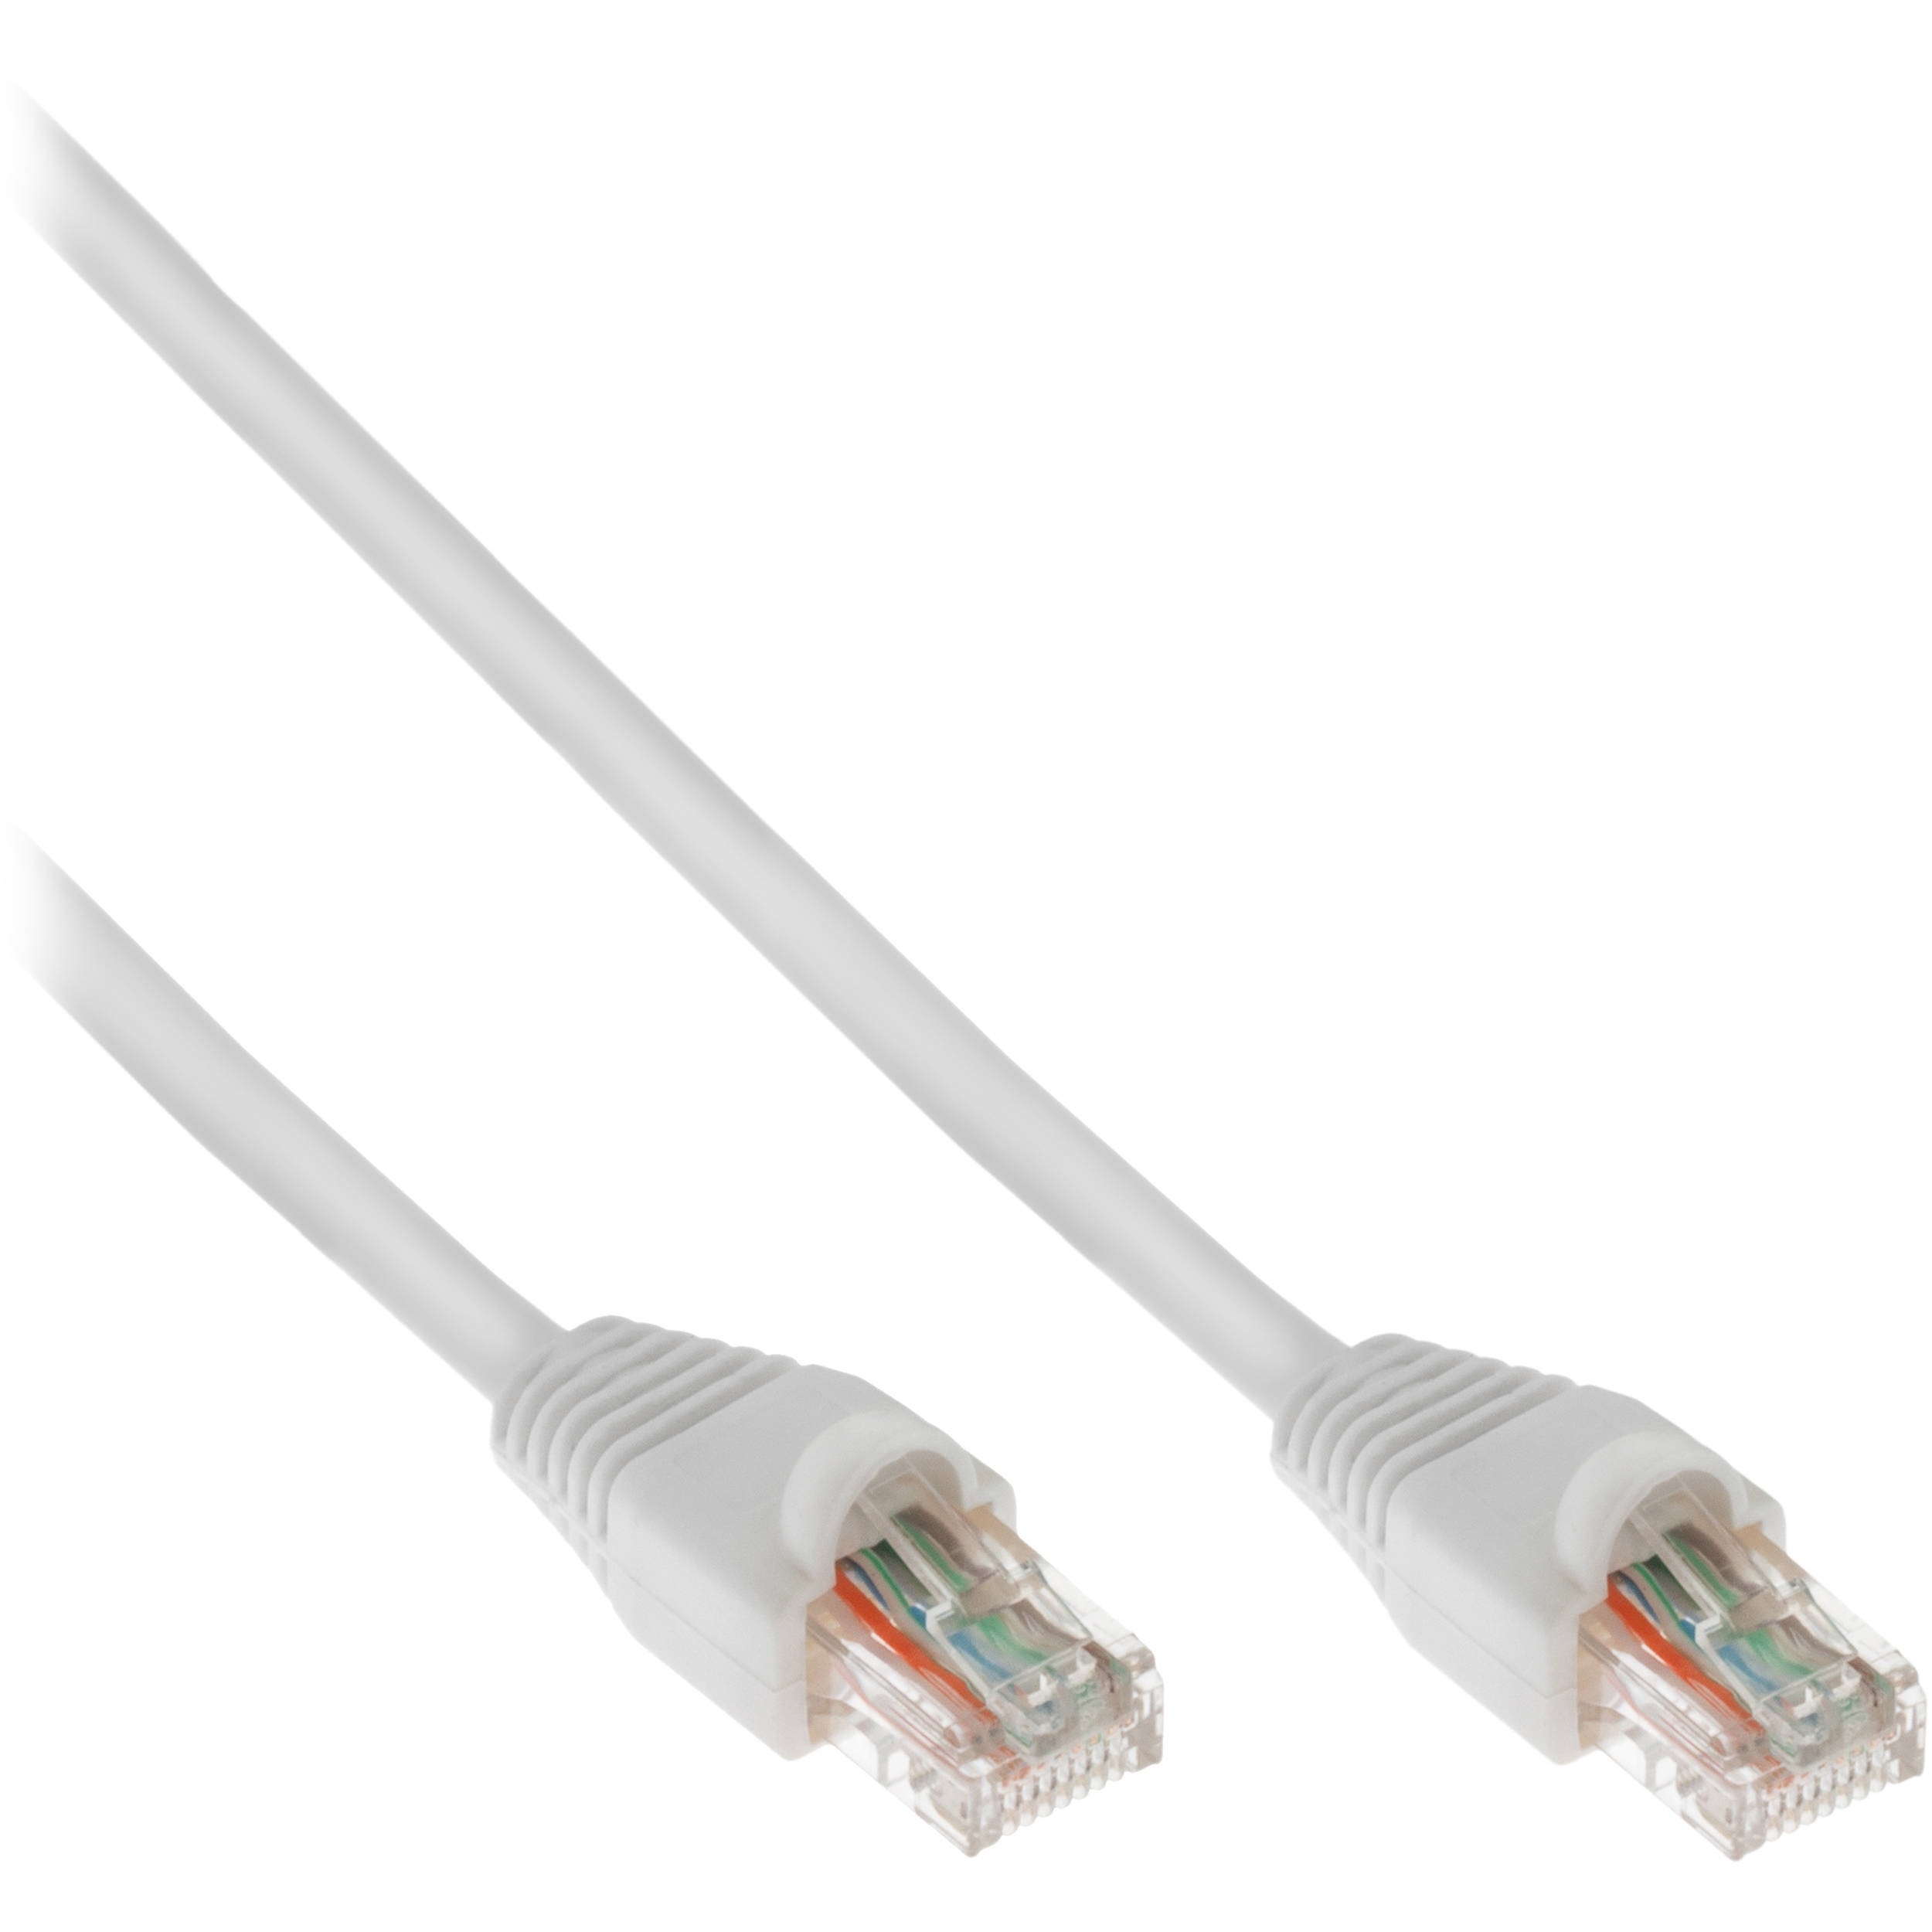 Pearstone Cat 5e Snagless Patch Cable (100', White)